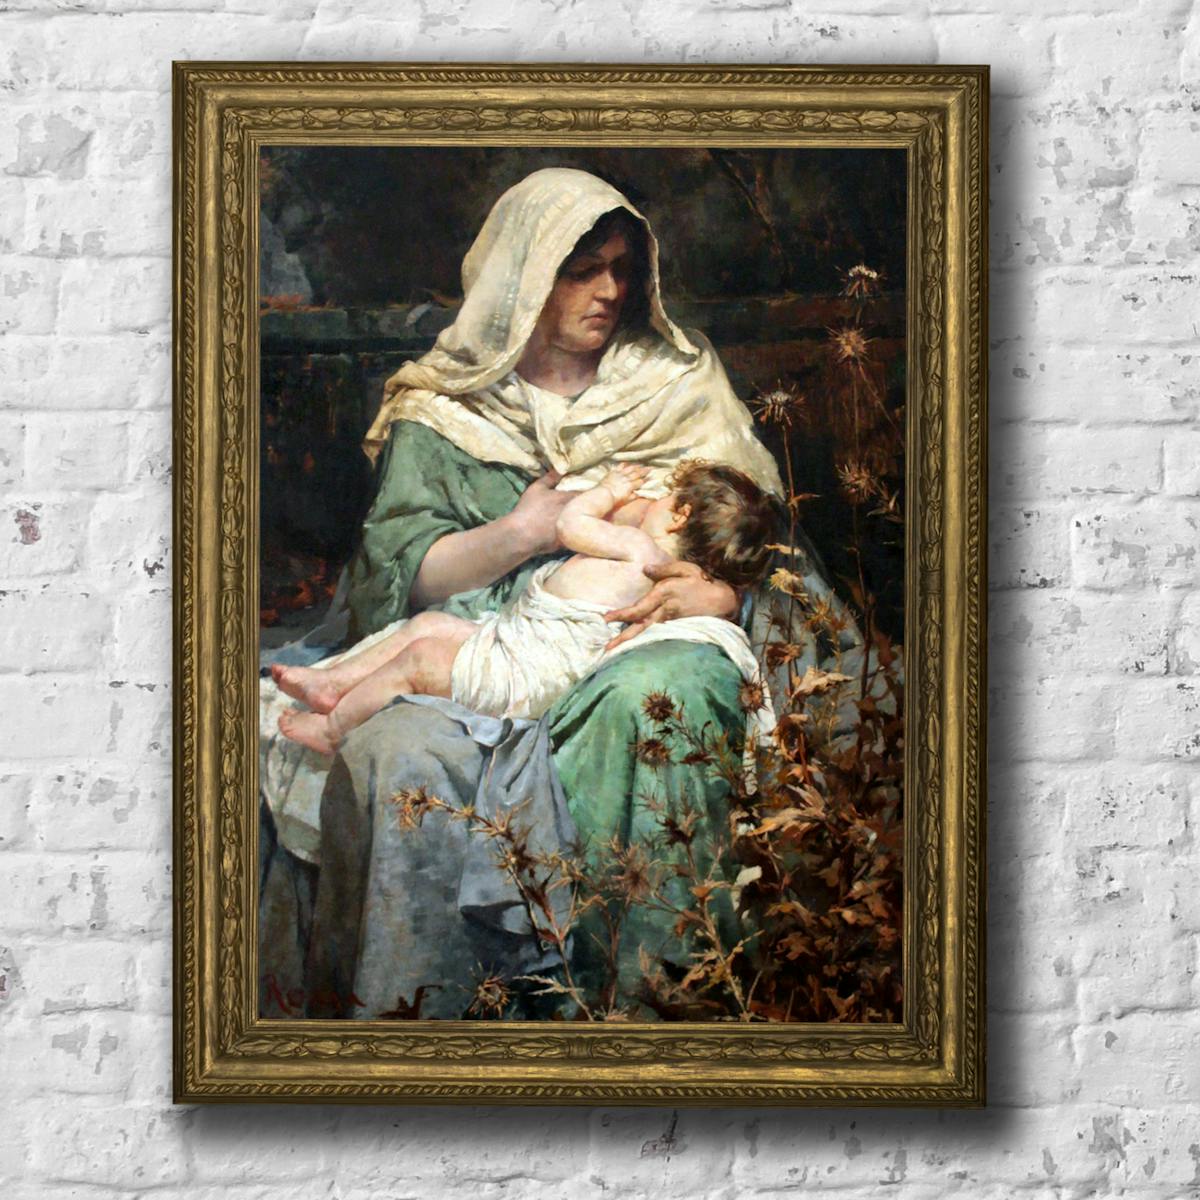 An image of an oil painting depicting a mother breastfeeding a child which is laying on her lap. The painting is in a gilt frame and appears against a white brick wall.